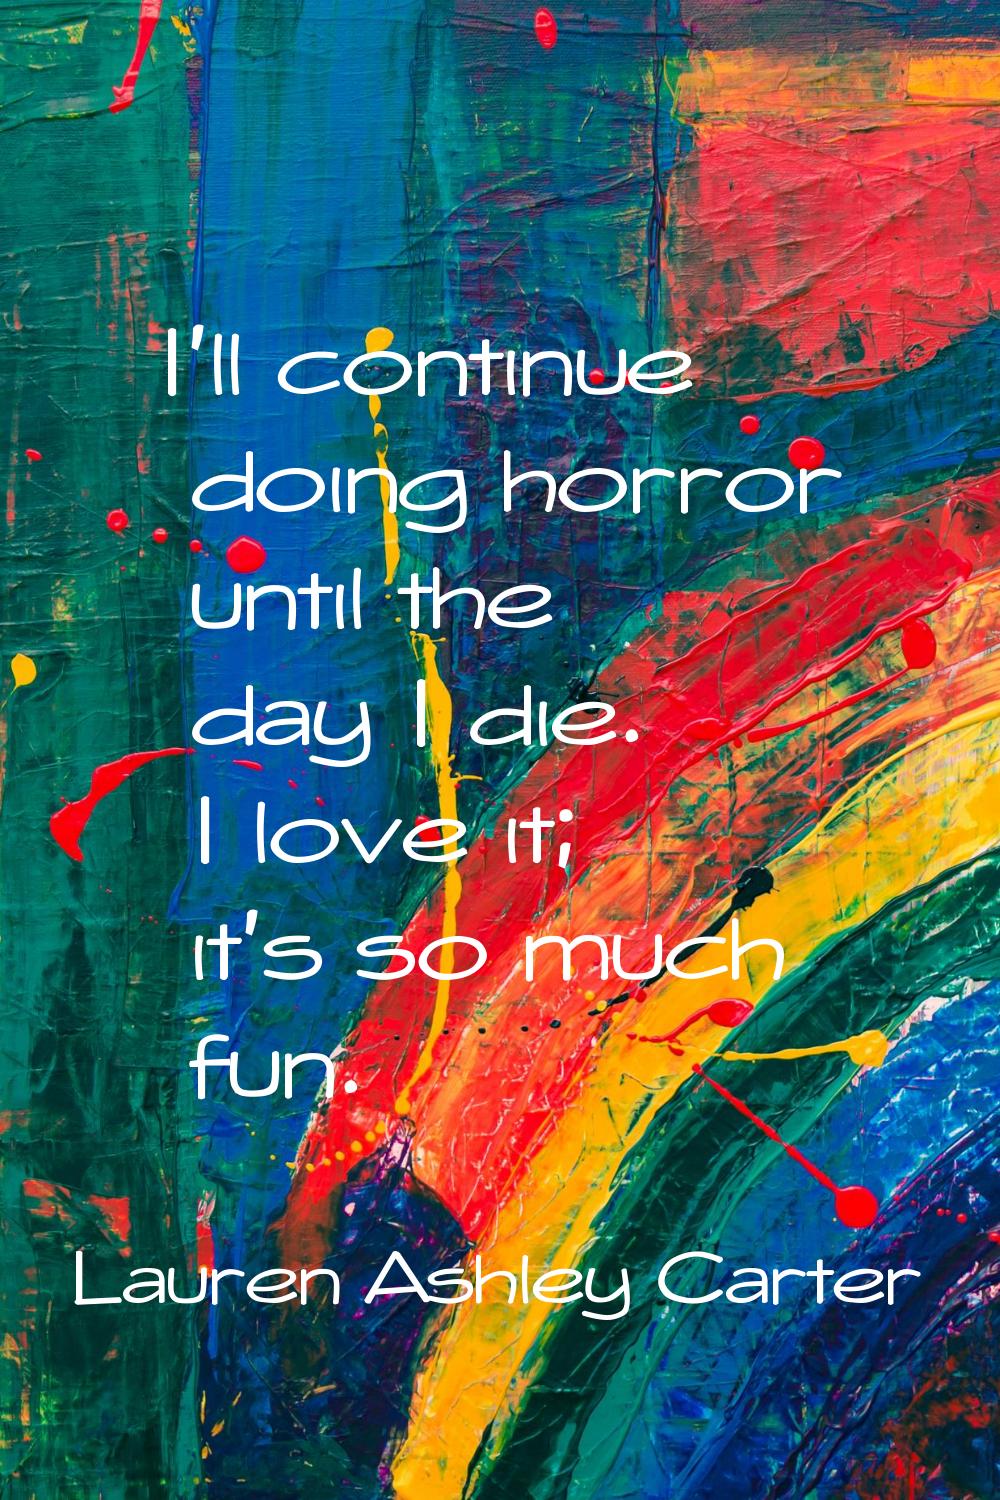 I'll continue doing horror until the day I die. I love it; it's so much fun.